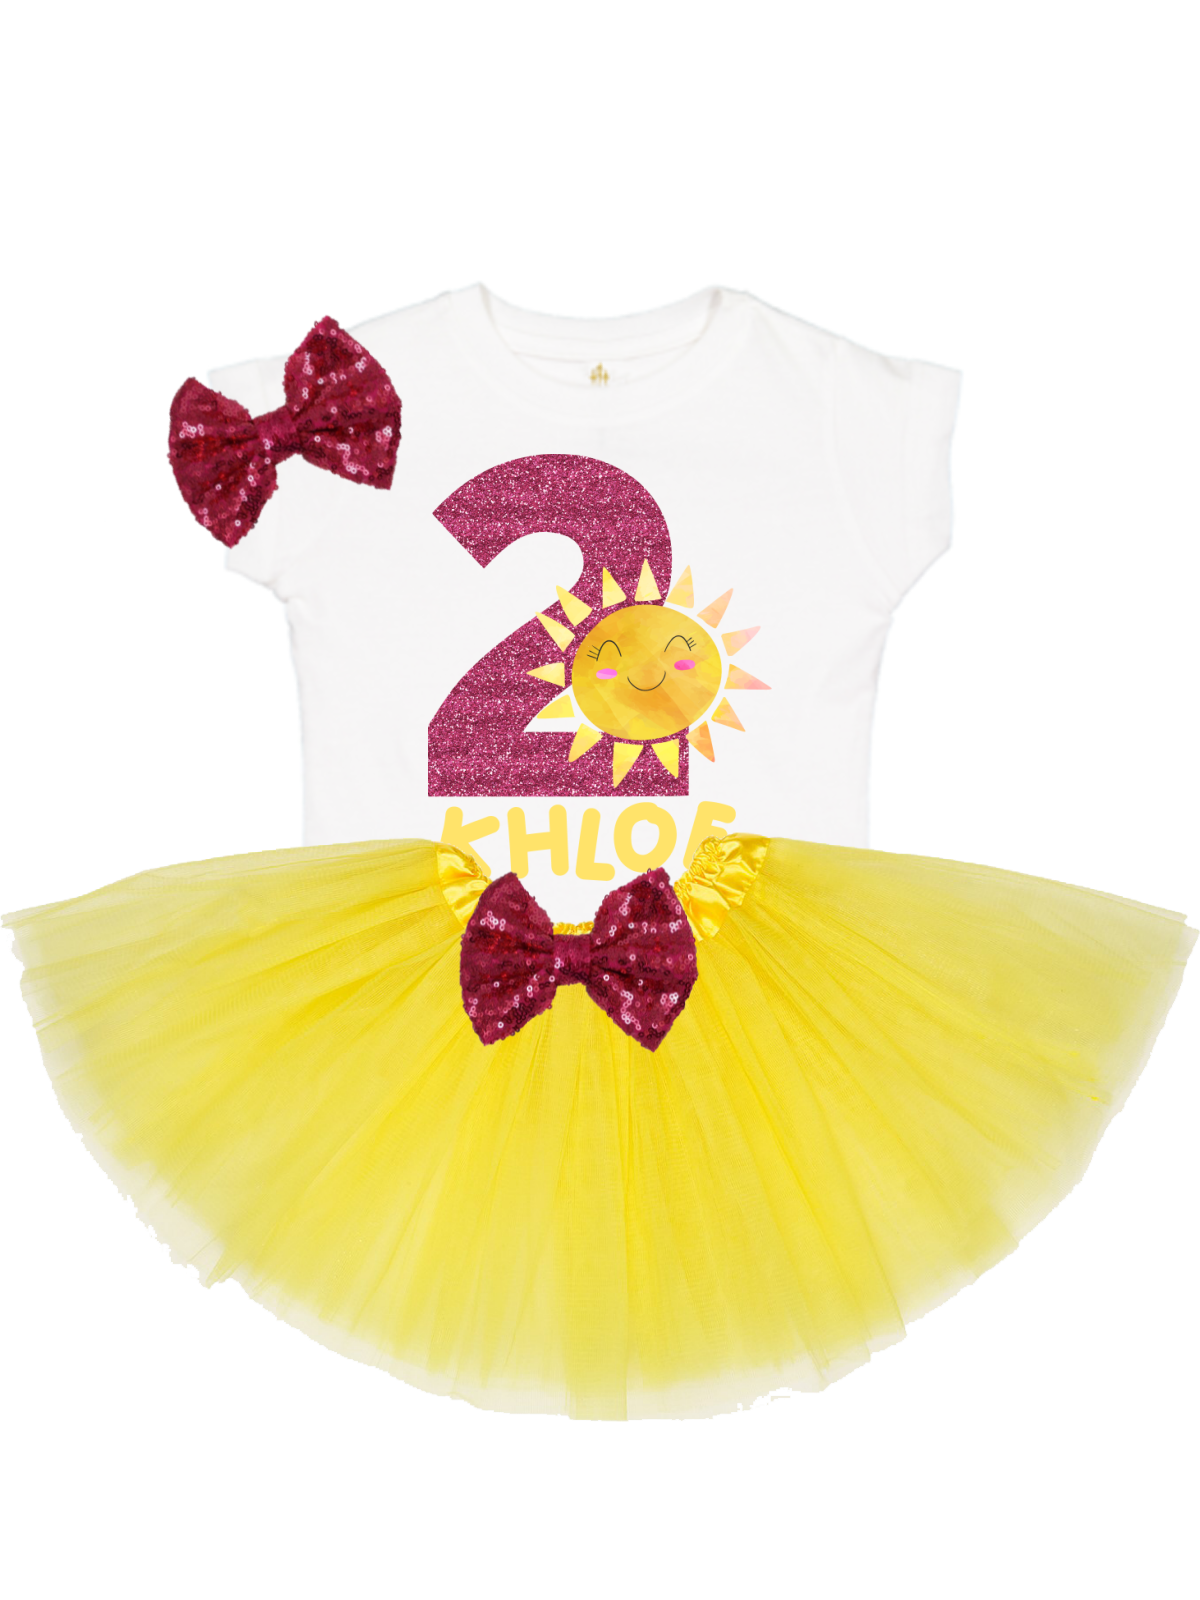 personalized yellow and pink sun shine tutu outfit